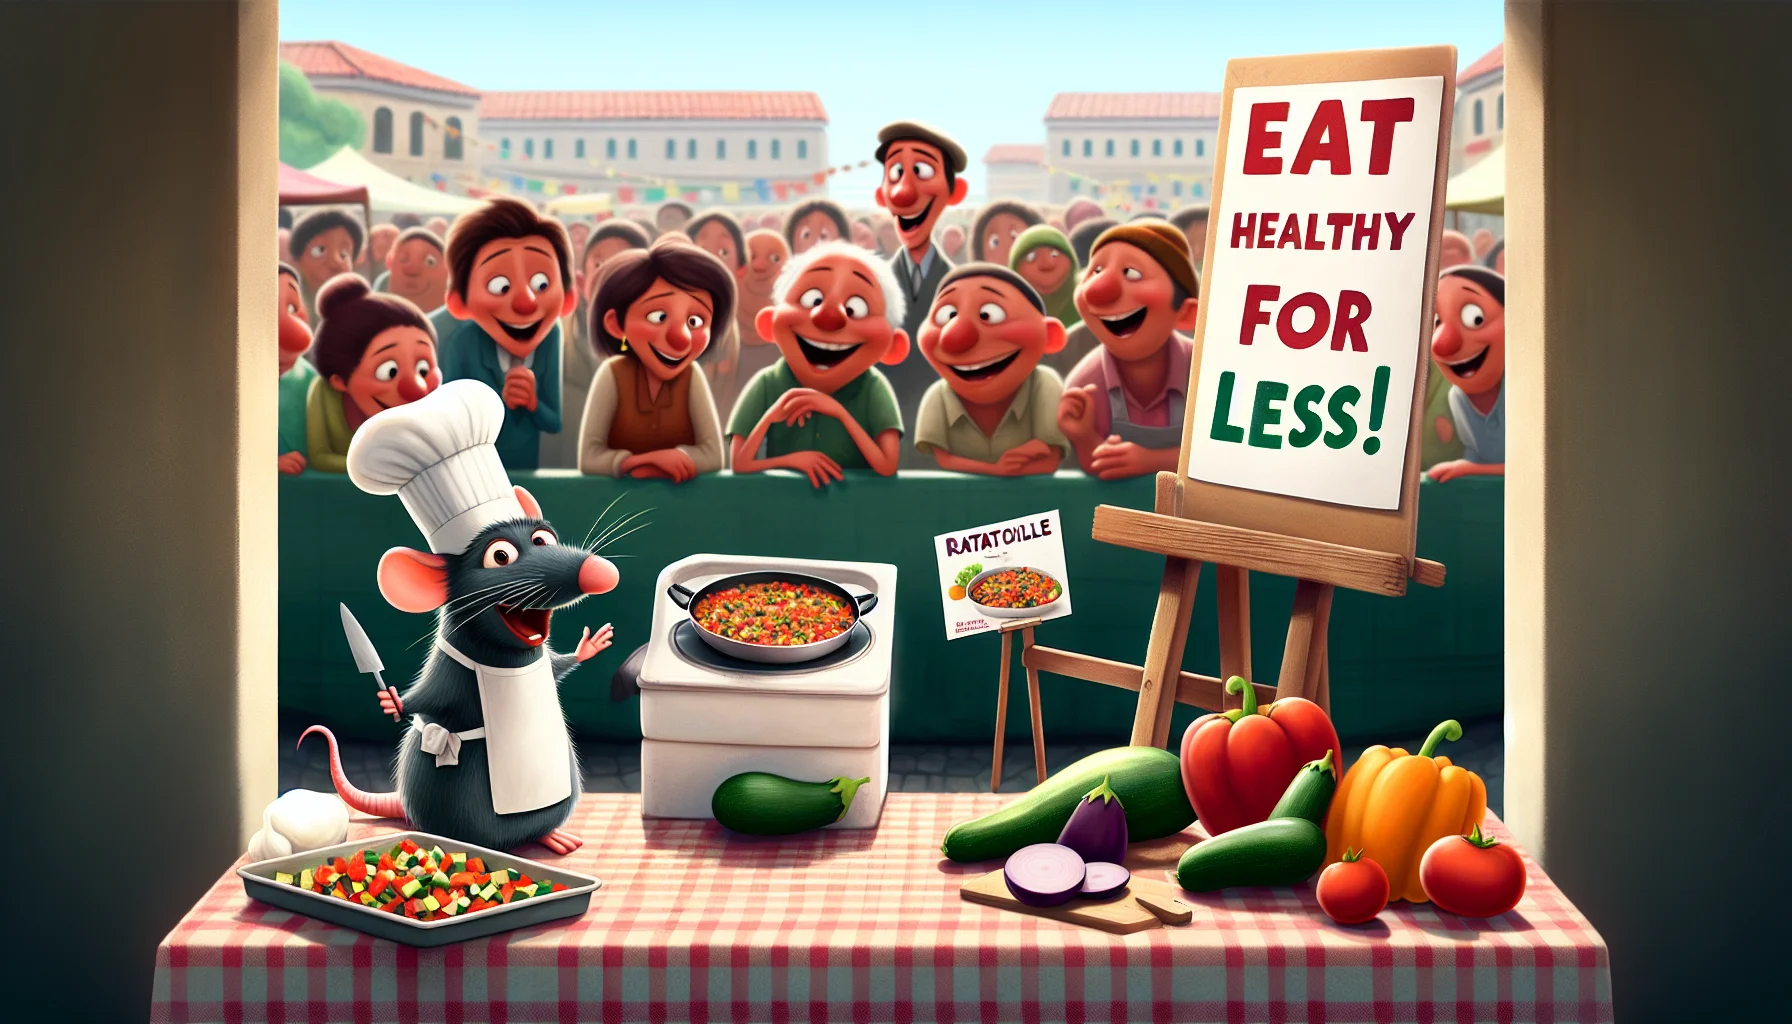 Show a humorous illustration where an anthropomorphic rat in a small chef's hat and apron, not unlike the concept of the movie Ratatouille, is showing off an affordable and healthy ratatouille recipe. Make sure the rat looks excited and engaging, trying to get attention of the people around. Have it hold a sign showing 'Eat healthy for less!' Also include ingredients like colorful diced vegetables (tomatoes, zucchinis, bell peppers, eggplants) and a copy of a simple cookbook lying nearby. The setting should be in a lively and crowded marketplace to emphasize the accessibility and affordability of the meal. All the people around should be smiling and interested in the rat's presentation, representing different genders and descents such as African, Asian, Caucasian, and Hispanic.